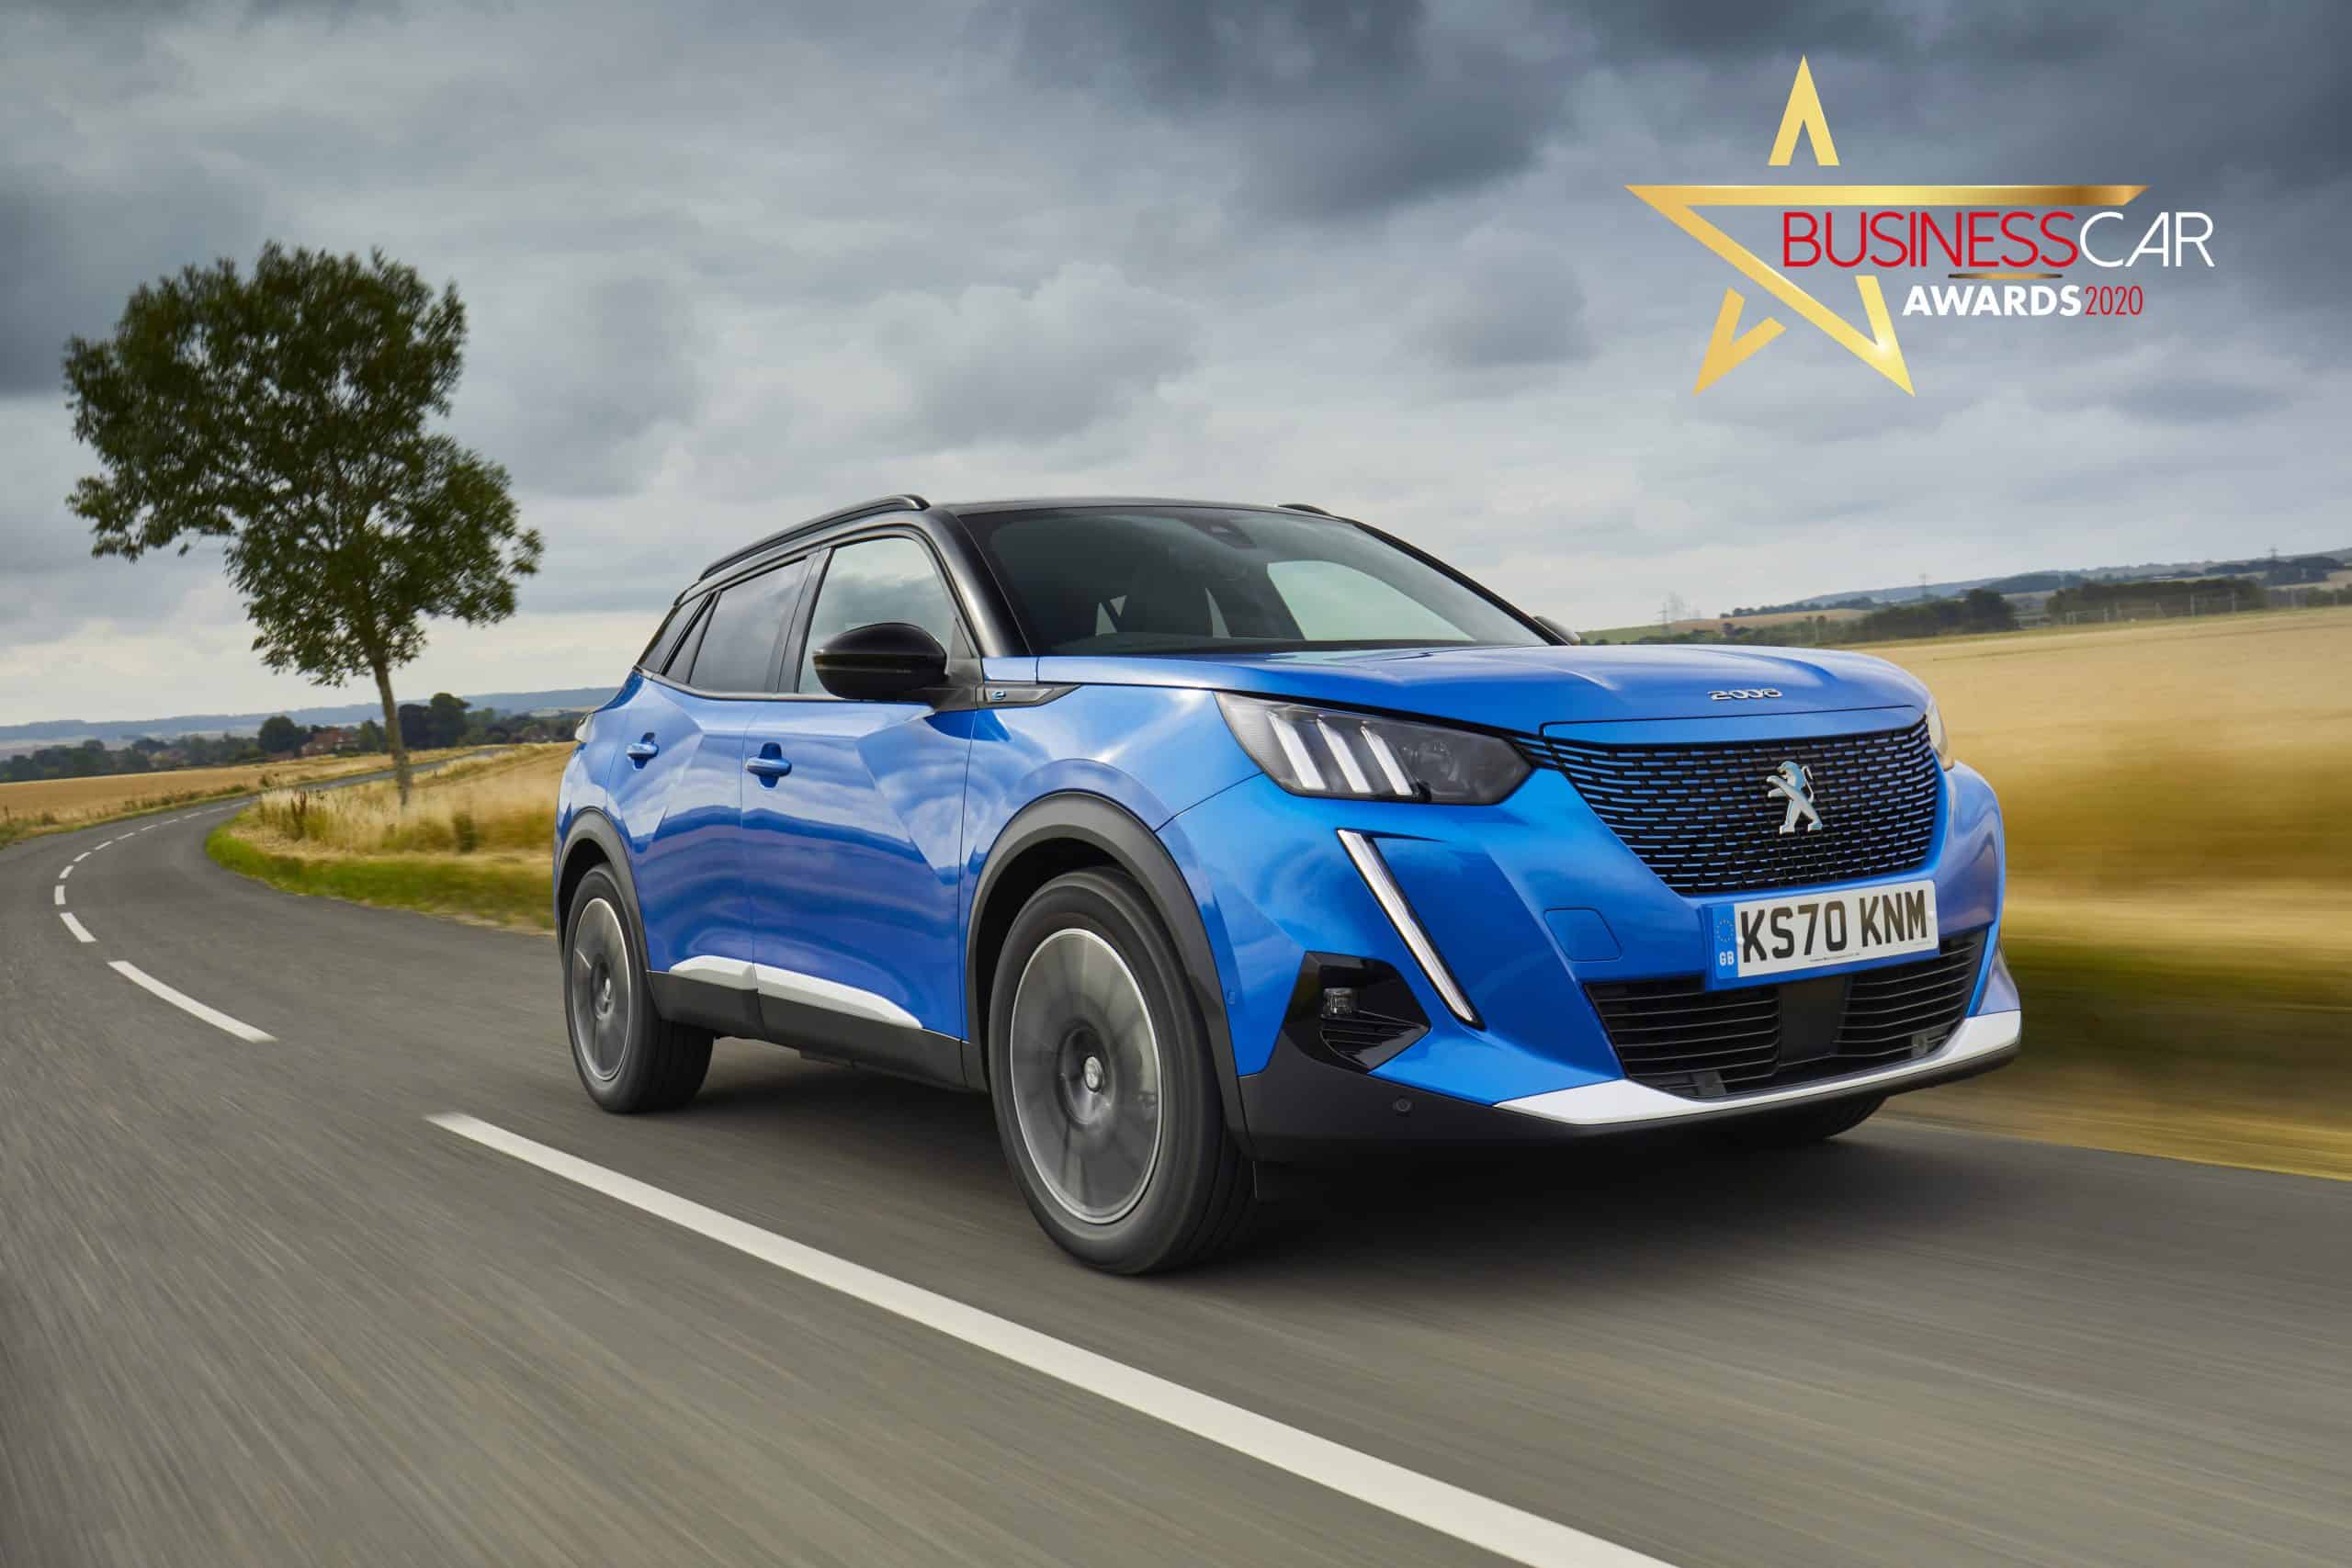 the all new peugeot e 2008 wins best electric car award at the business car awards